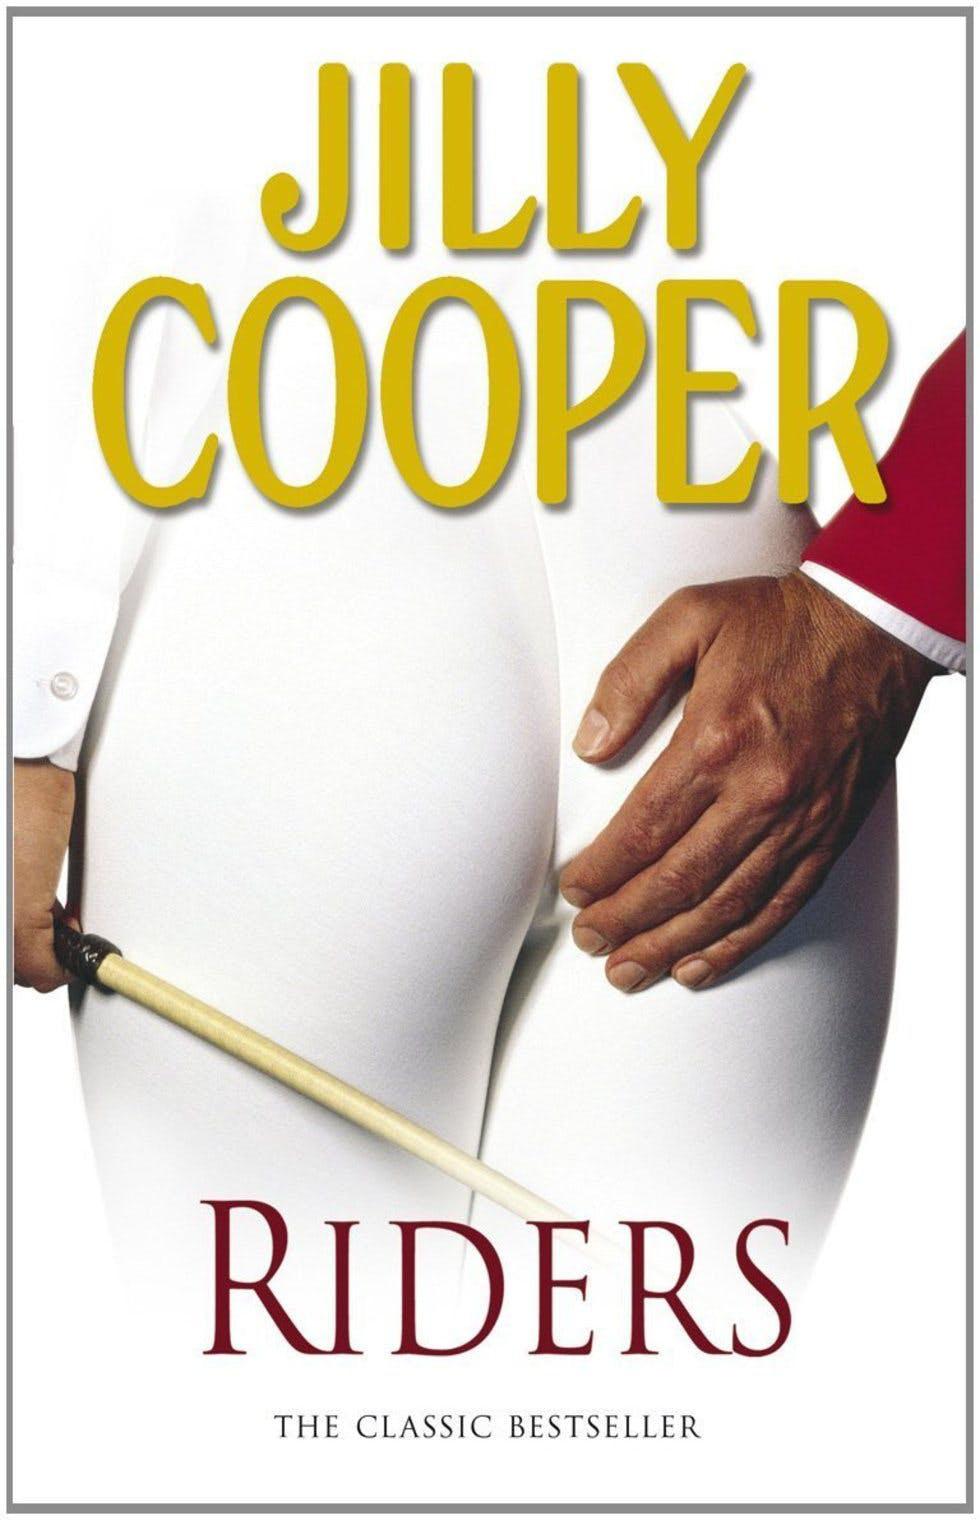 ‘Riders’ introduced the roguish Rupert Campbell-Black and was the first of Cooper’s Rutshire Chronicles